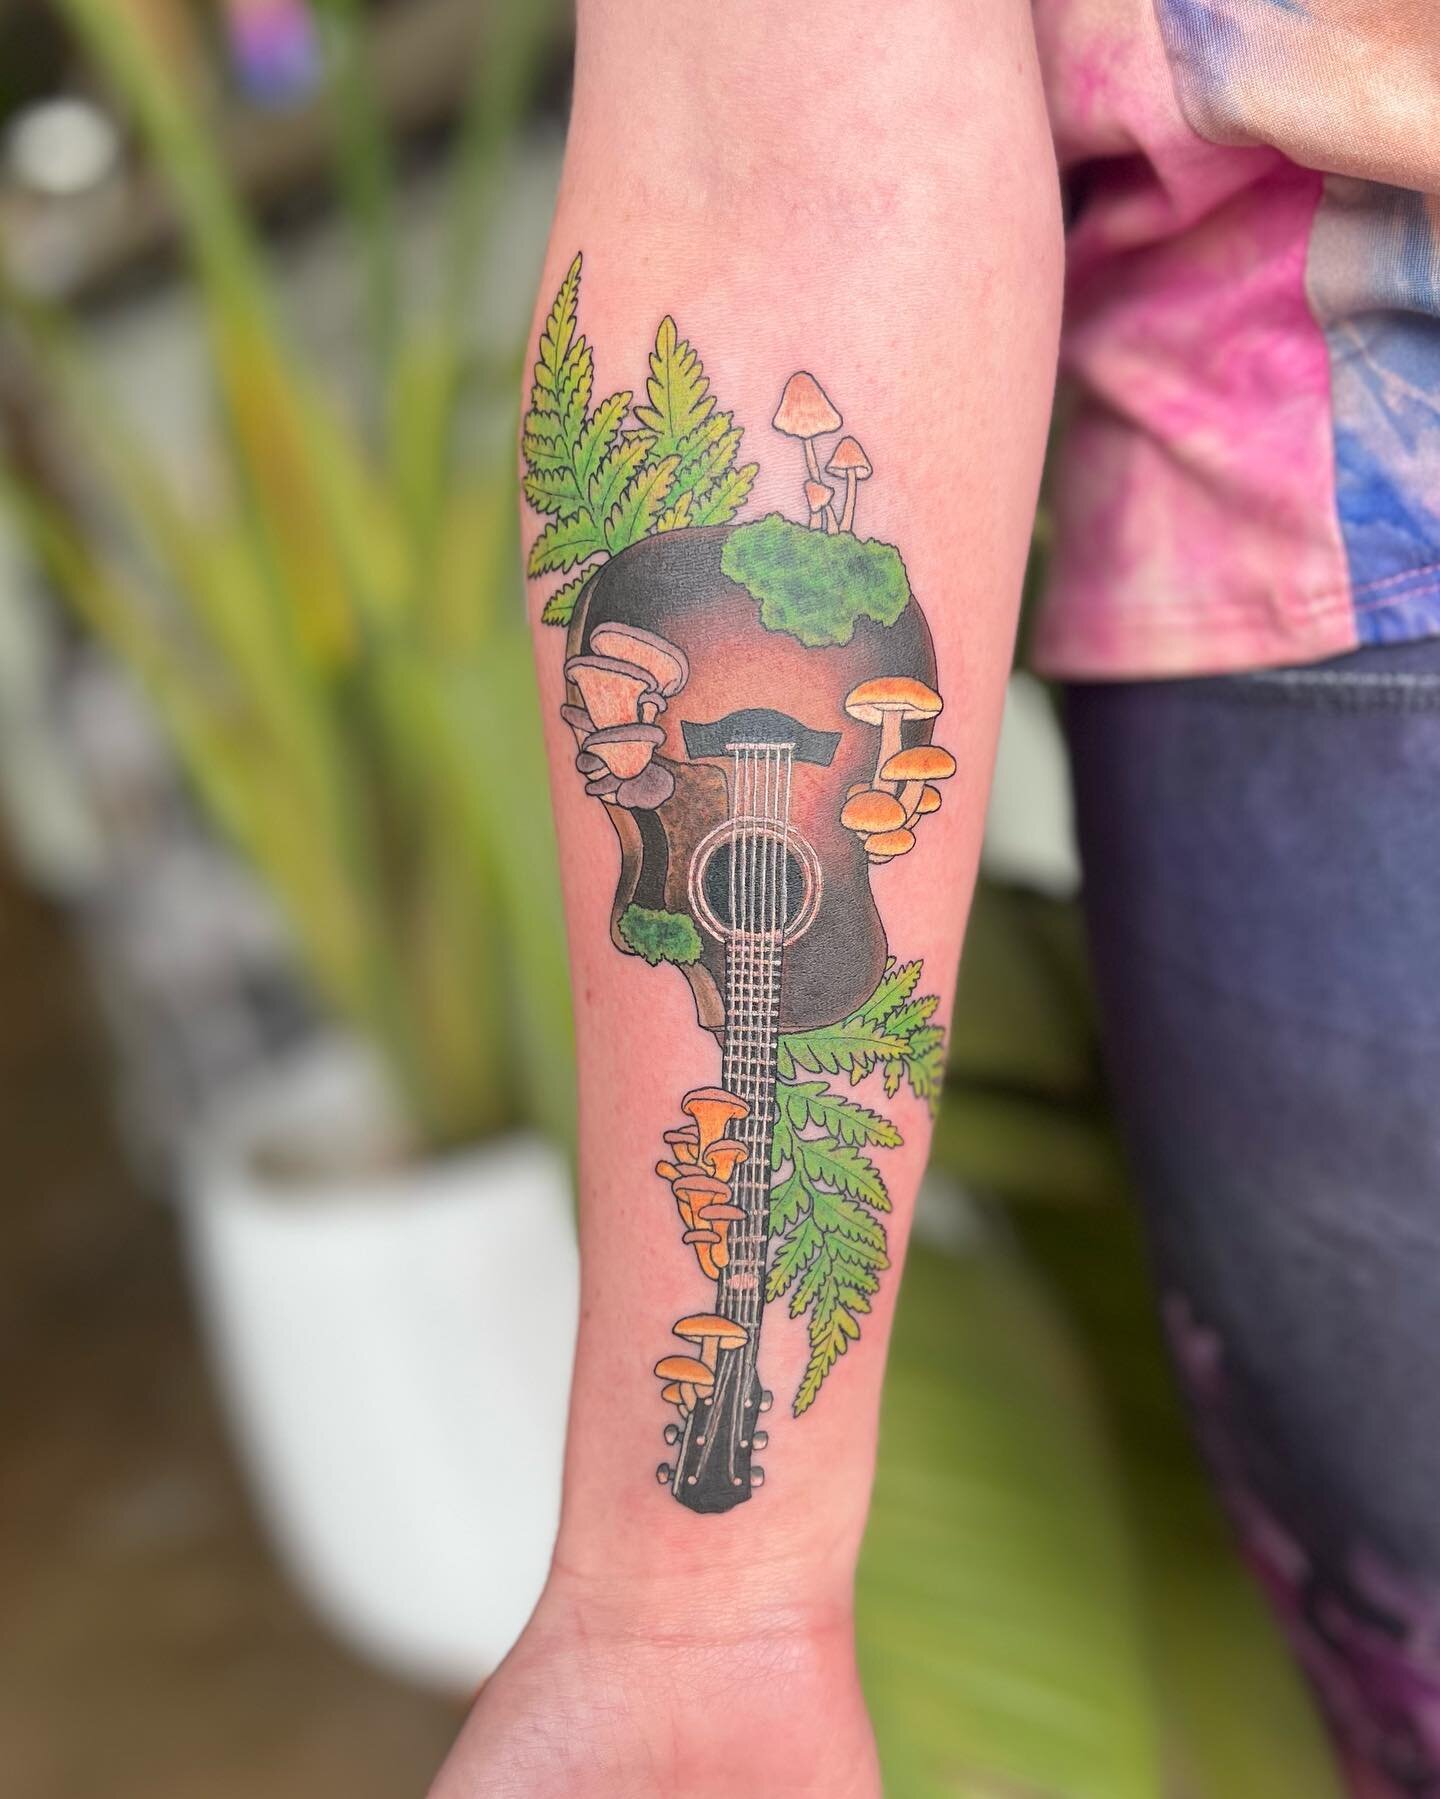 Ellie&rsquo;s guitar
Had a ton of fun making this tattoo inspired by The Last Of Us for my amazing client, Blessing. Thank you for making the trip from Austin to work with me!
&bull;
#RayCorsonTattoo 
#DallasTattooArtist 
#TexasTattoos
#FemaleTattooe